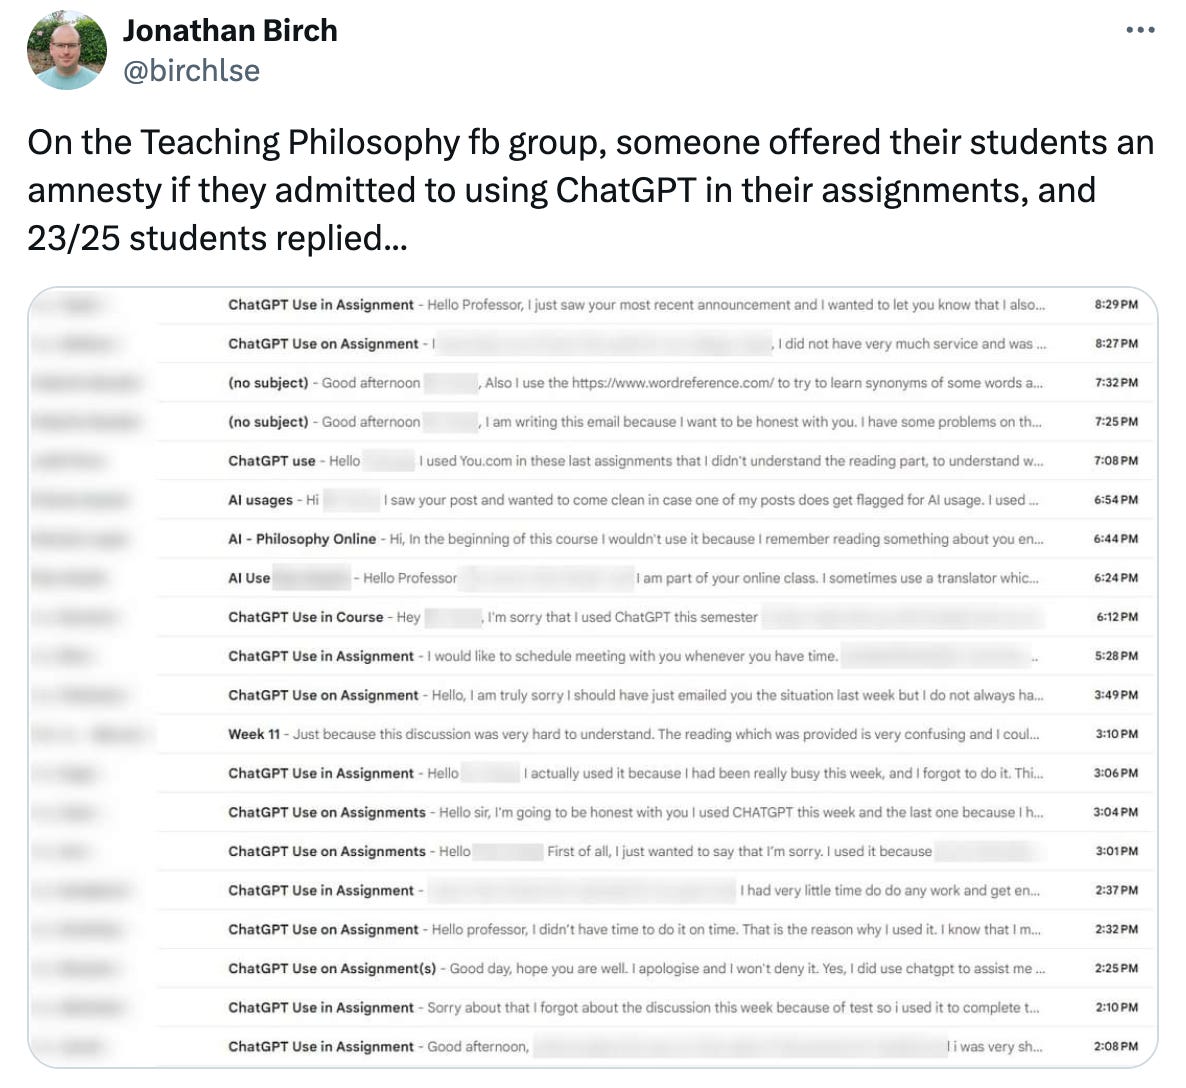 A tweet saying "On the Teaching Philosophy fb group, someone offered their students an amnesty if they admitted to using ChatGPT in their assignments, and 23/25 students replied..." and an image of a gmail inbox with 23 students writing in about their "CHatGPT Use on Assignment"